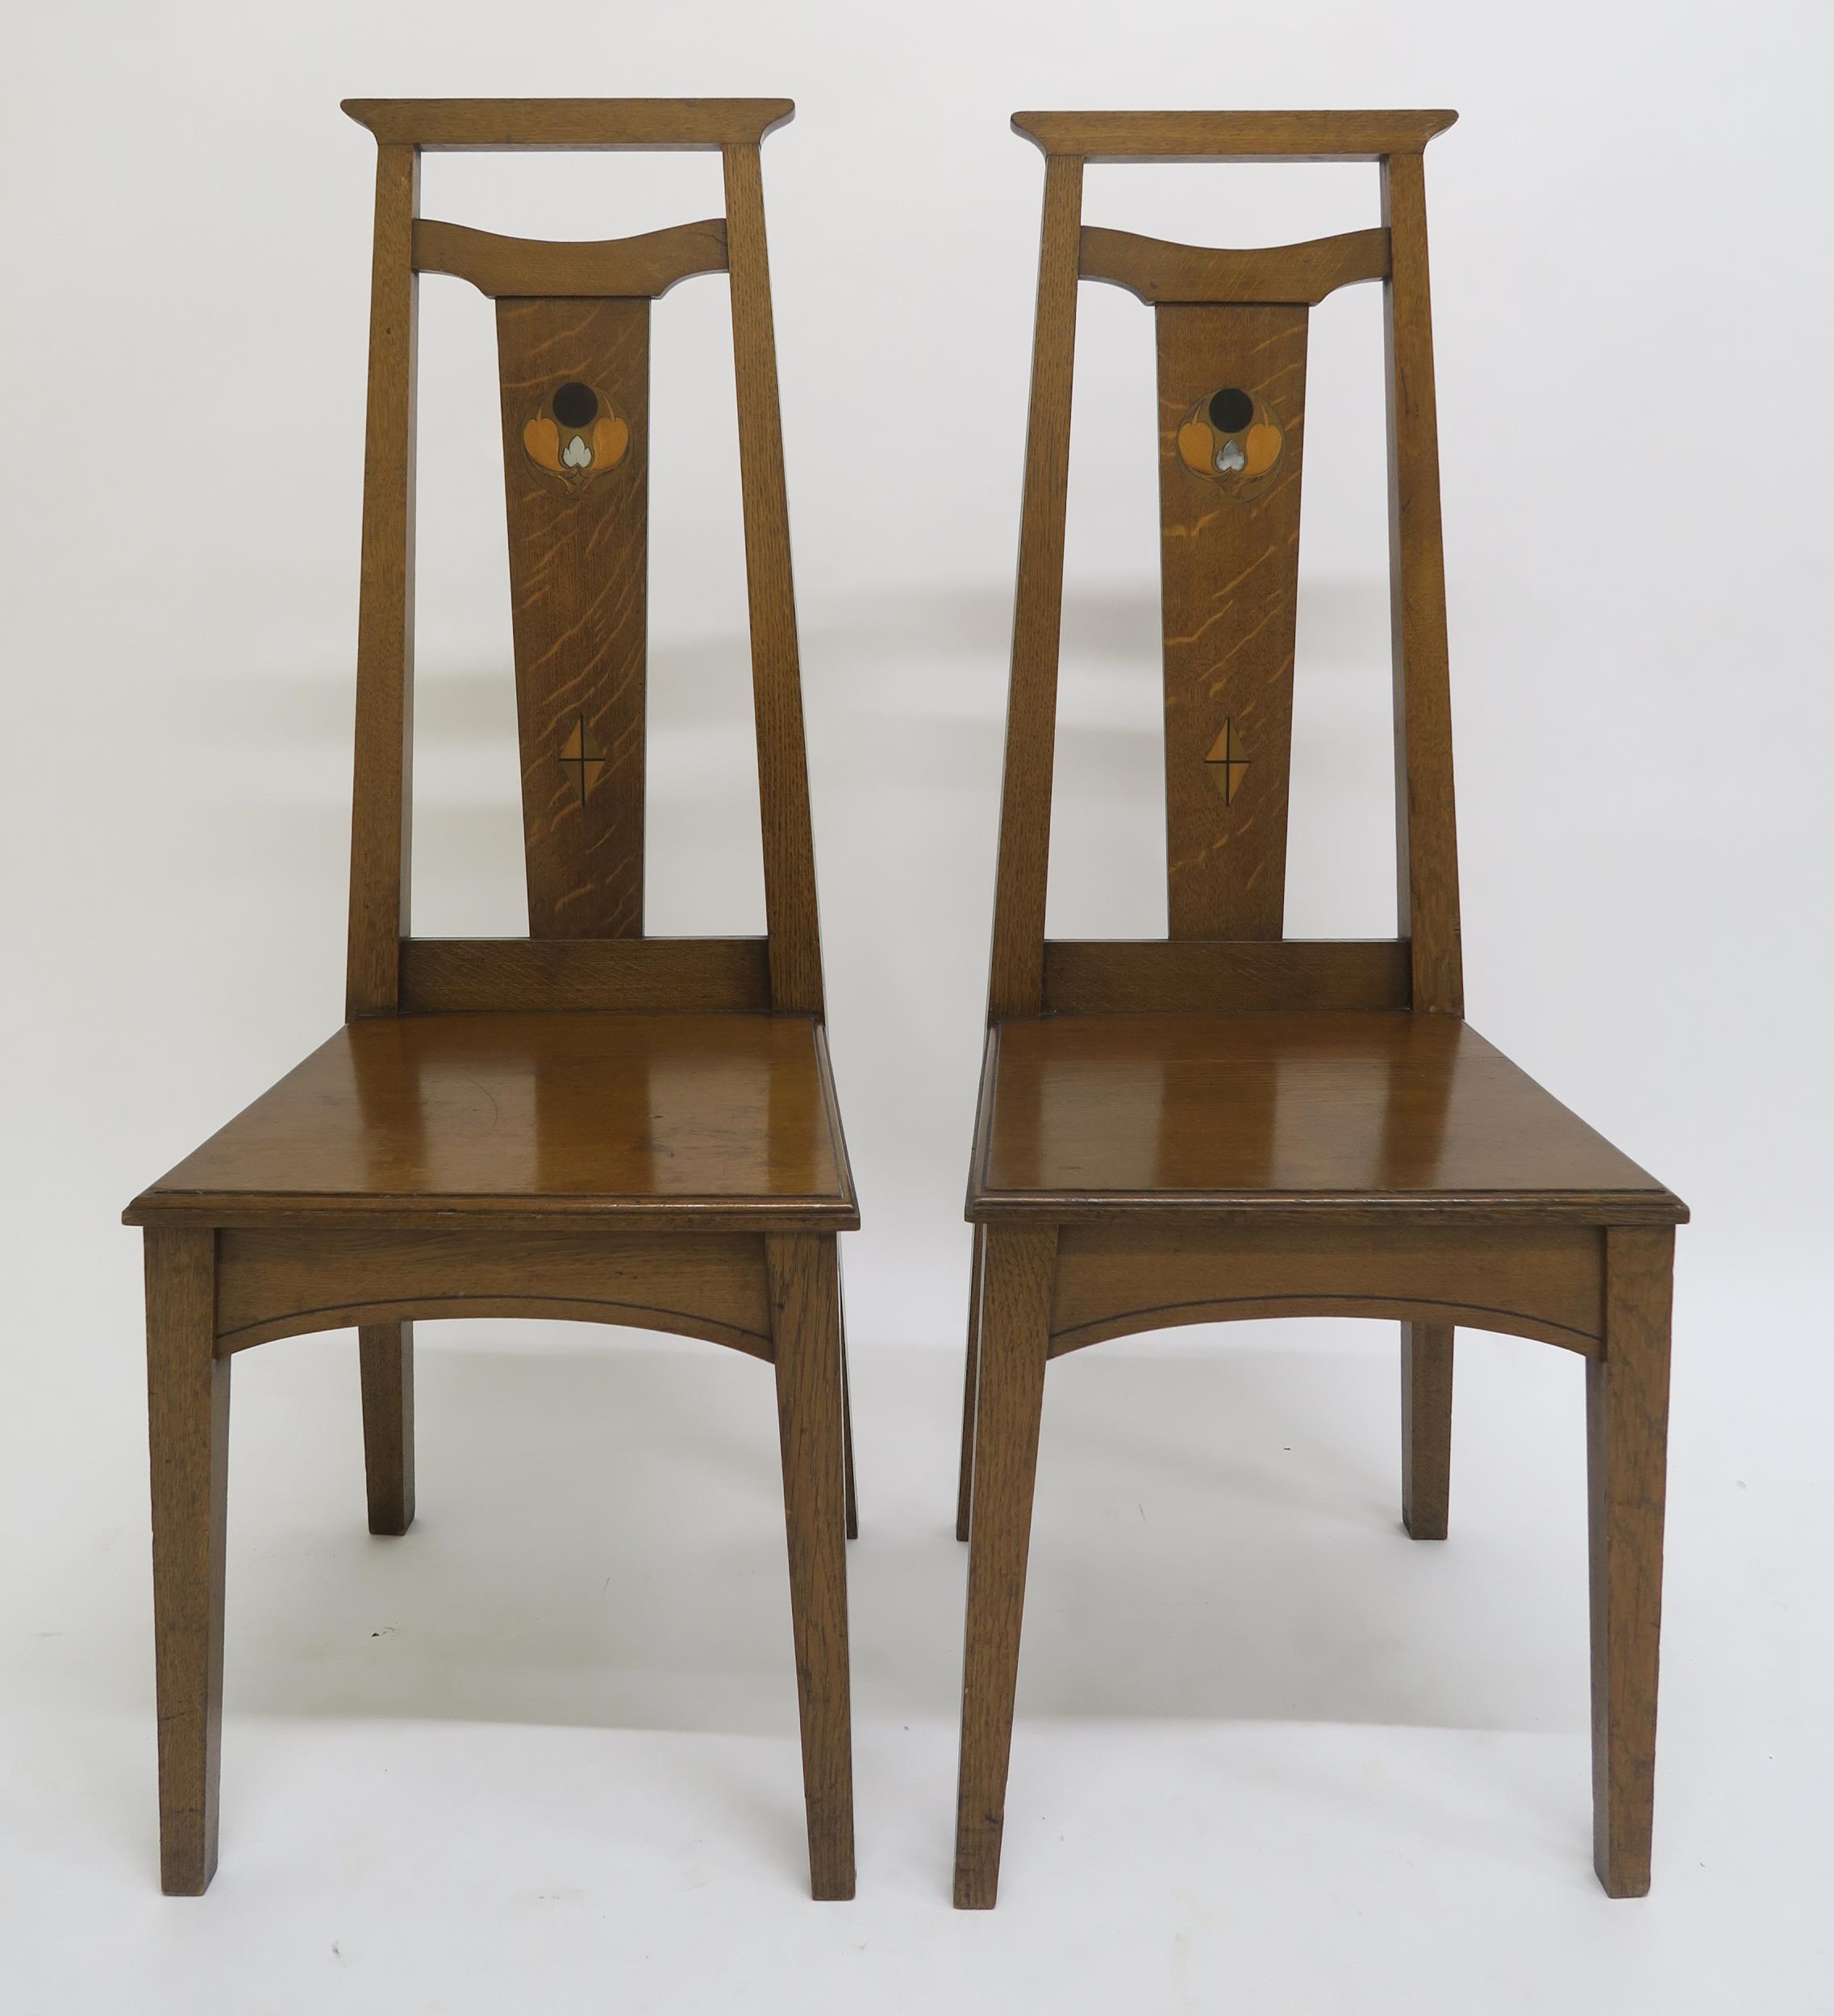 A PAIR OF ARTS AND CRAFTS HALL CHAIRS, each with mother of pearl and fruitwood inlay to splats on